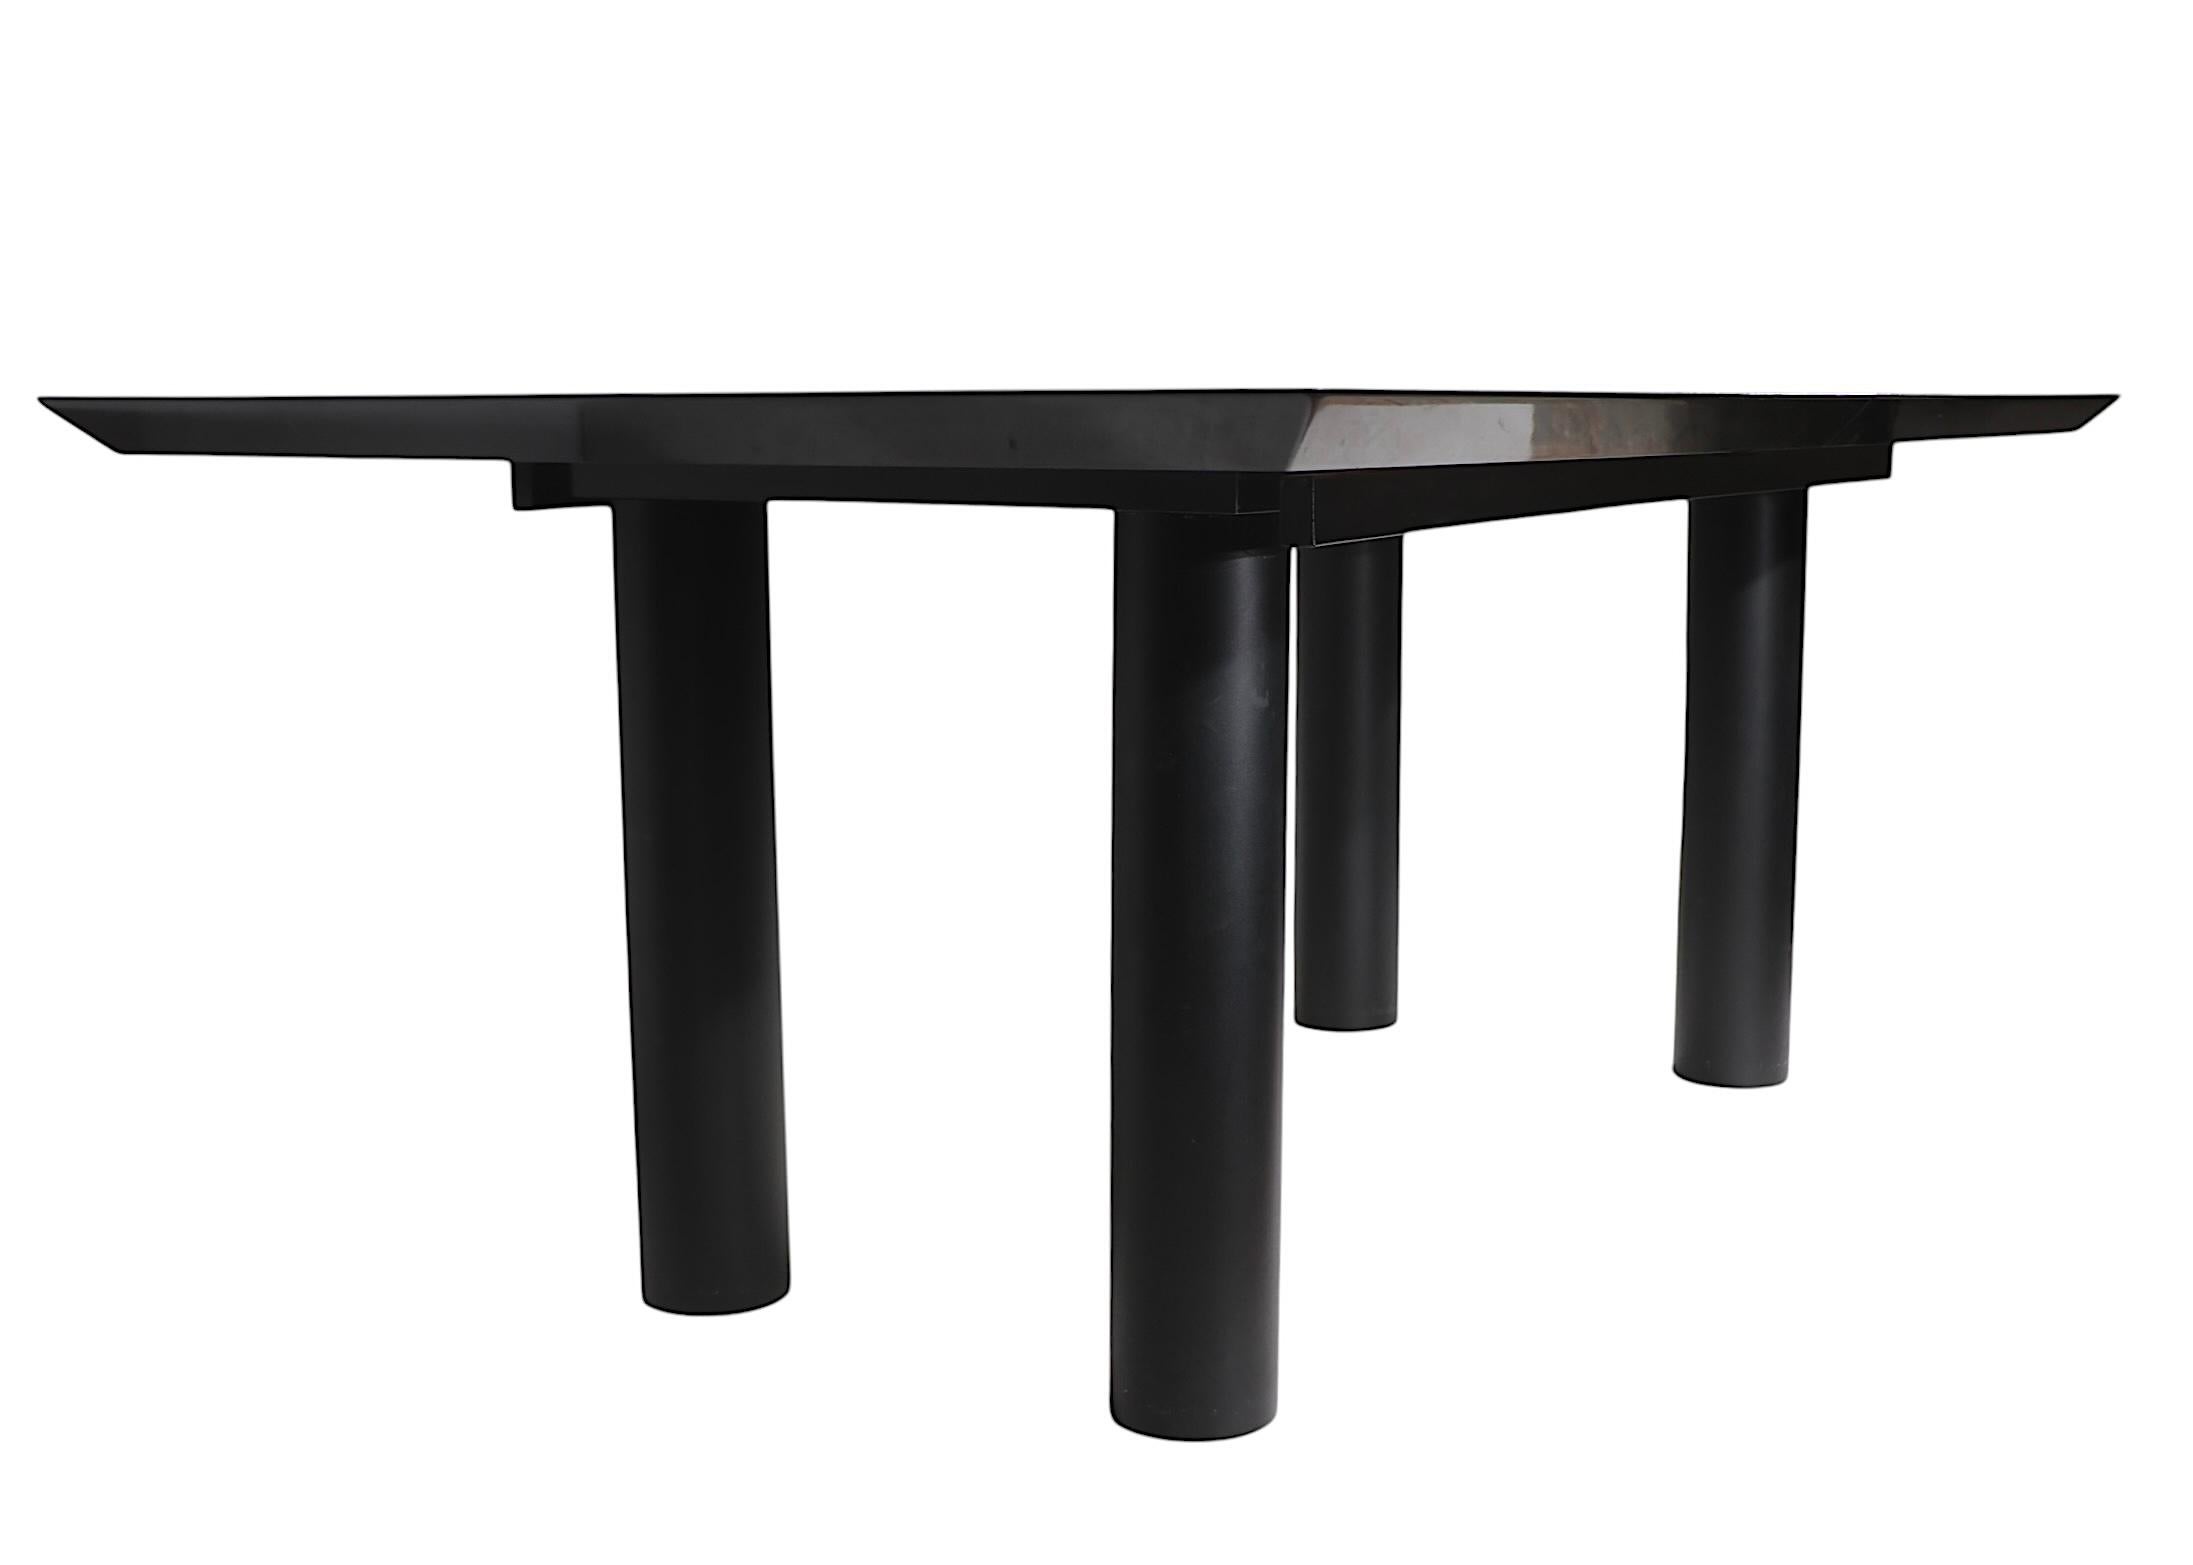 Italian Post Modern Dining Table by Oscar Dell Arredamento for Miniforms c 1970s For Sale 2